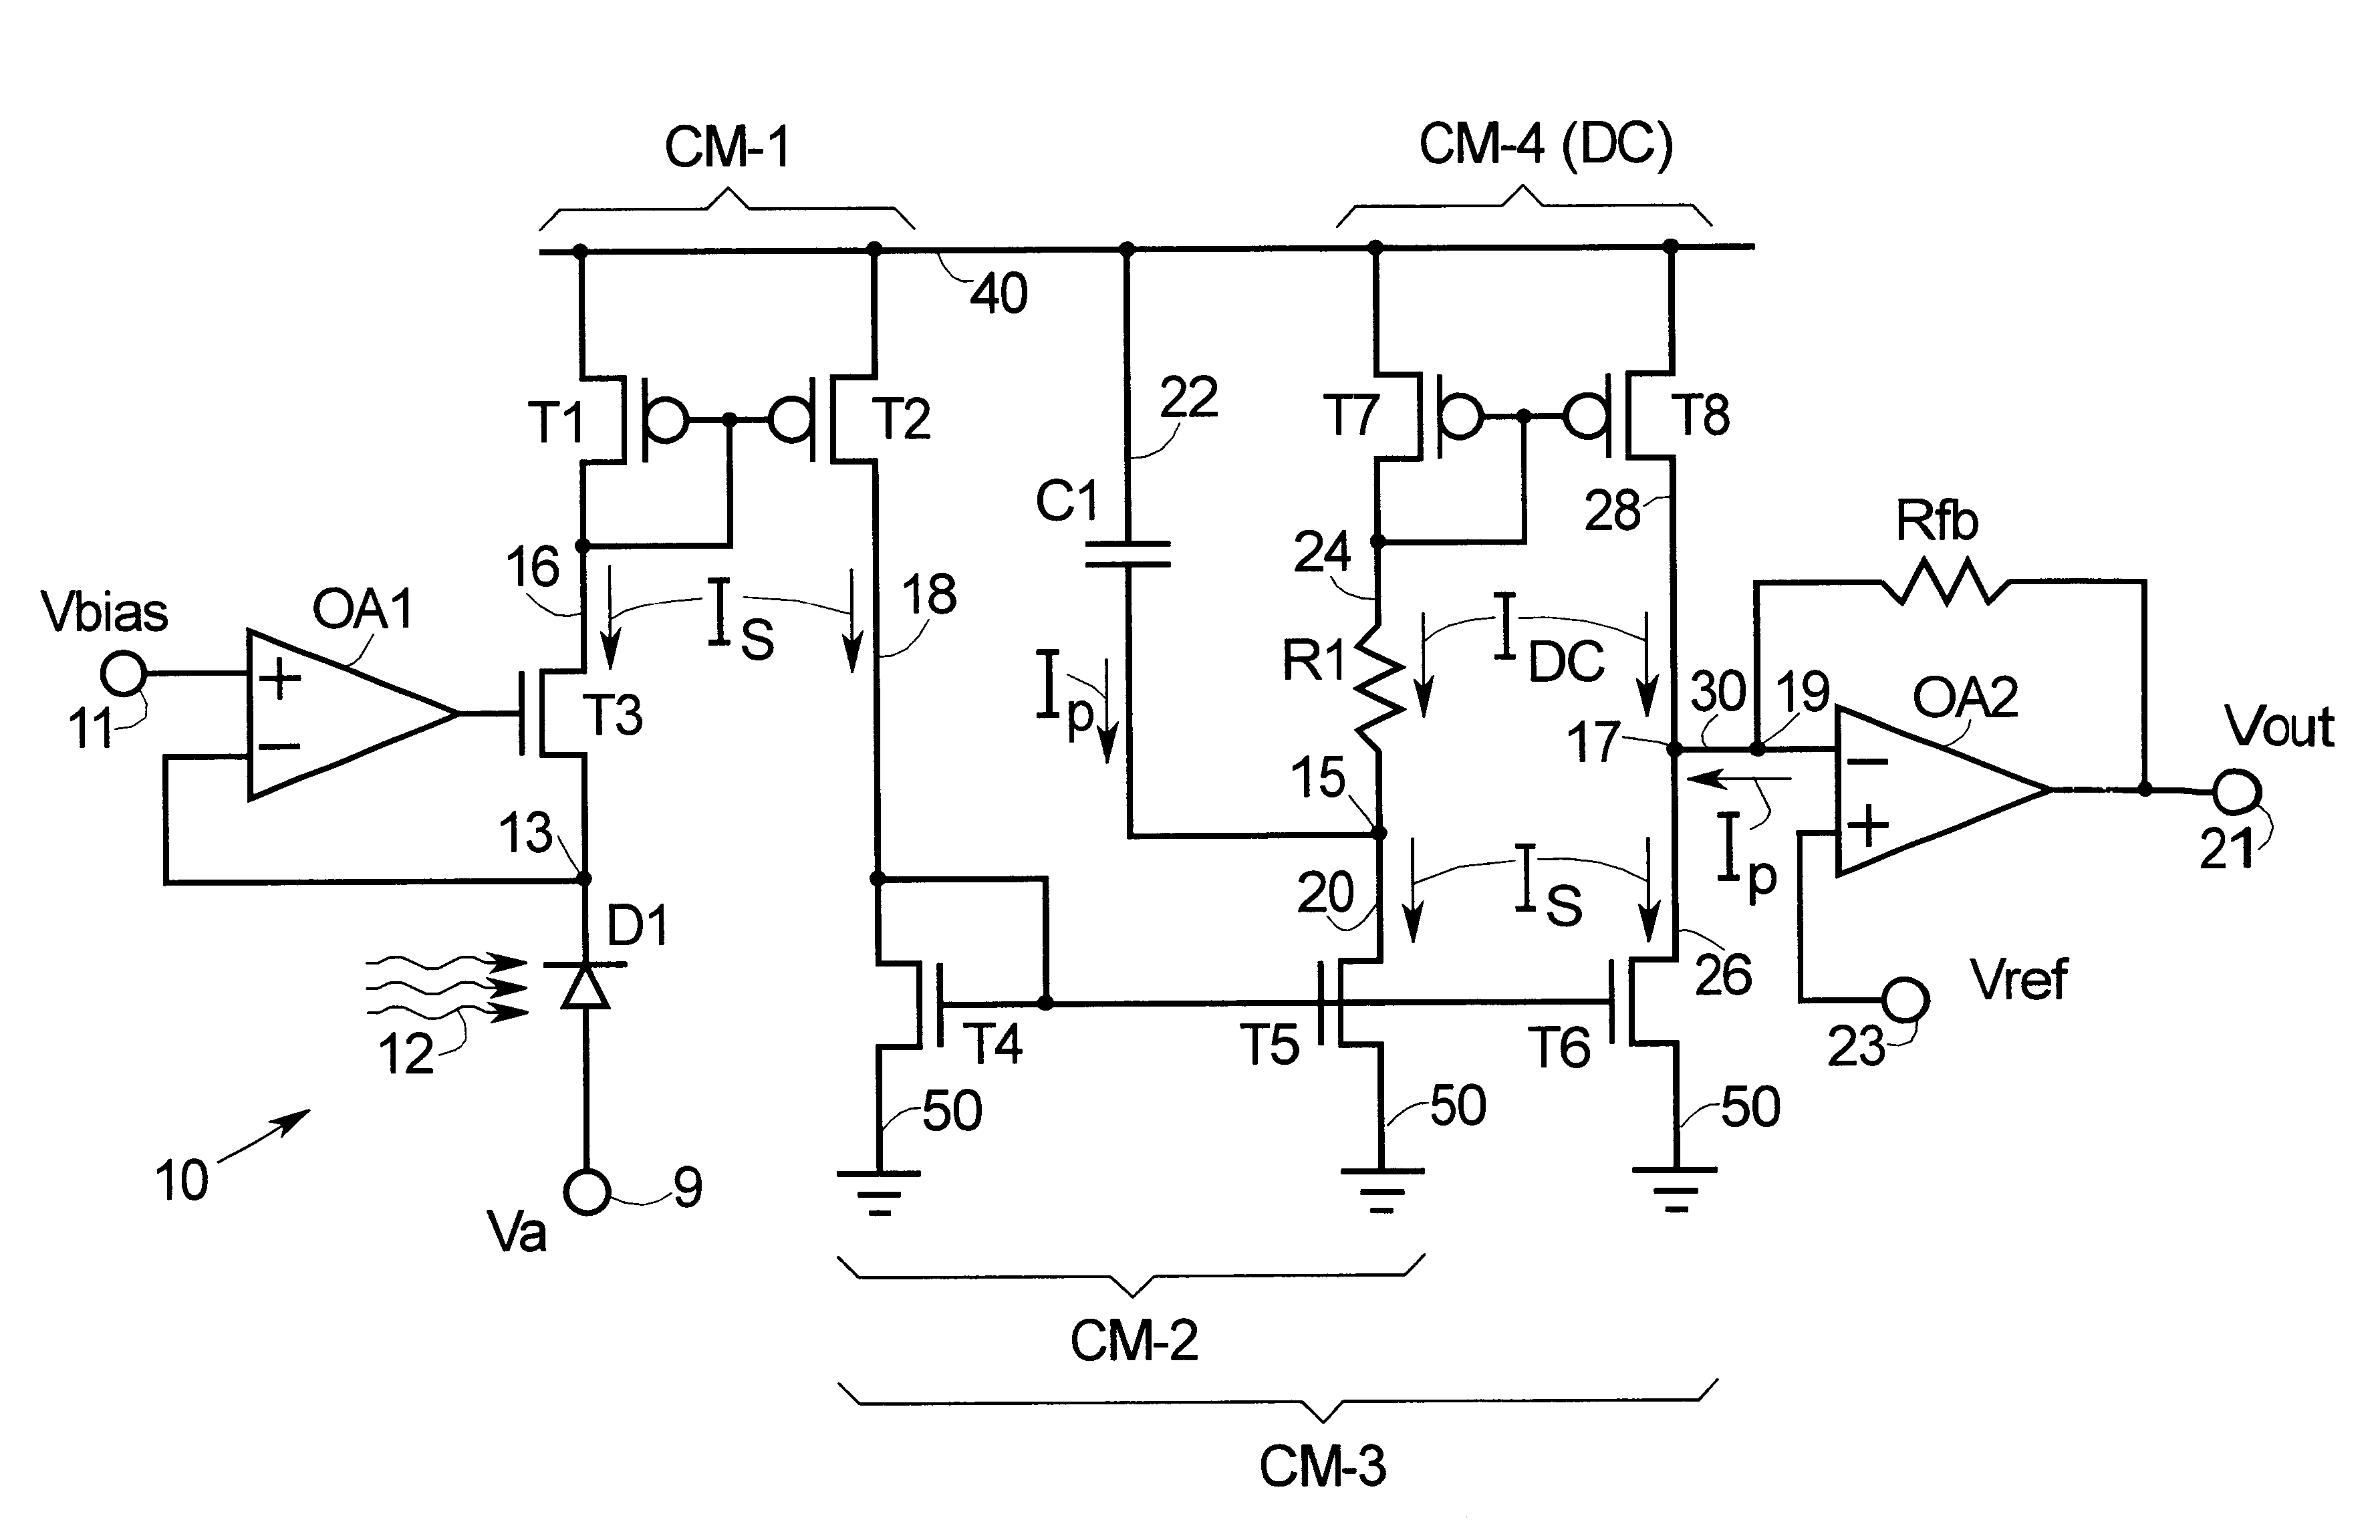 DC cancellation apparatus and method